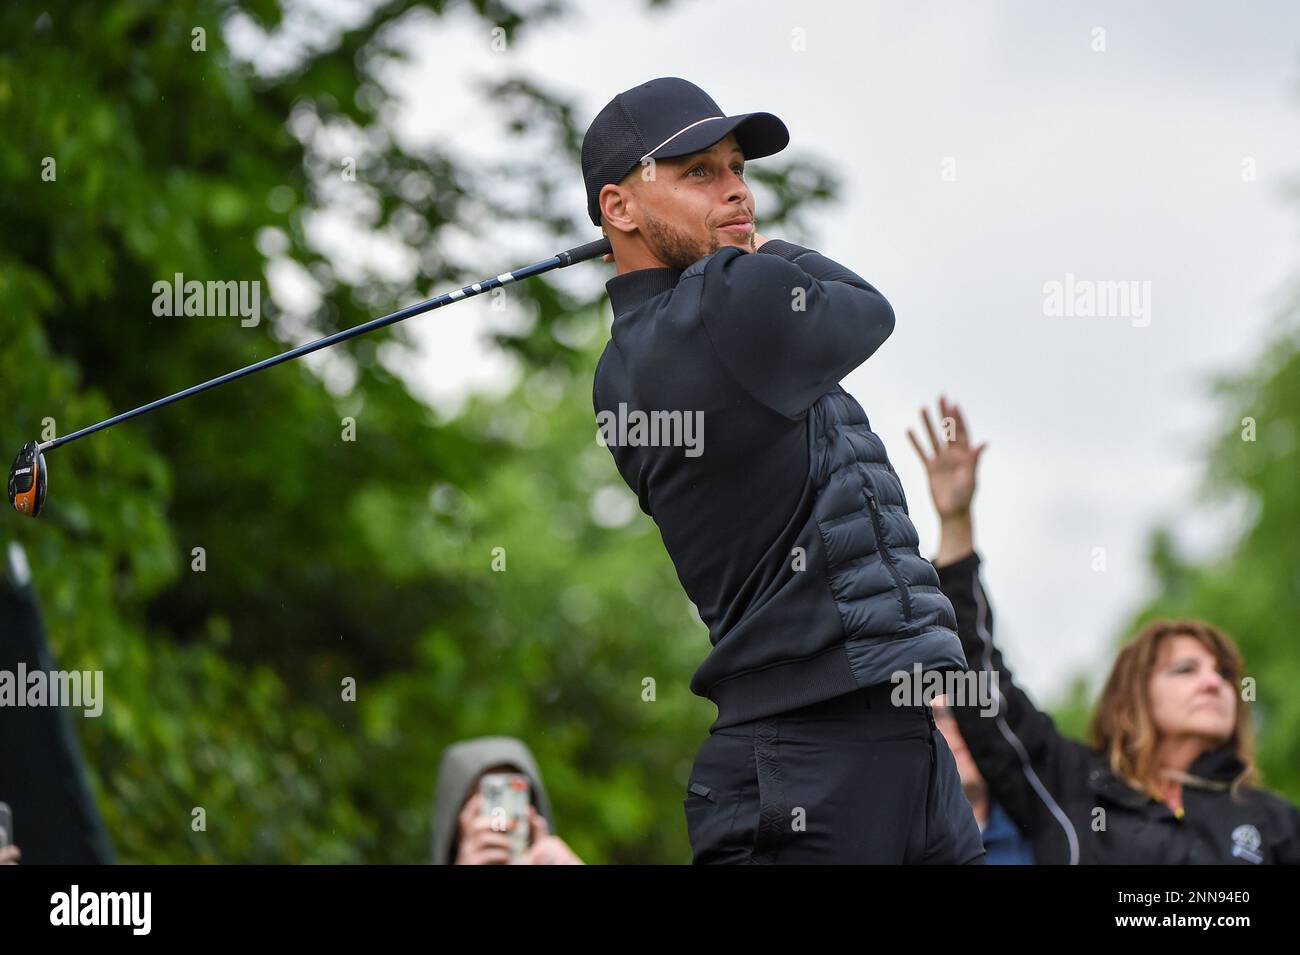 DUBLIN, OH - JUNE 02: NBA All Star Steph Curry watches his tee shot on 3  during the Memorial Tournament practice round at Muirfield Village Golf  Club on June 2, 2021 in